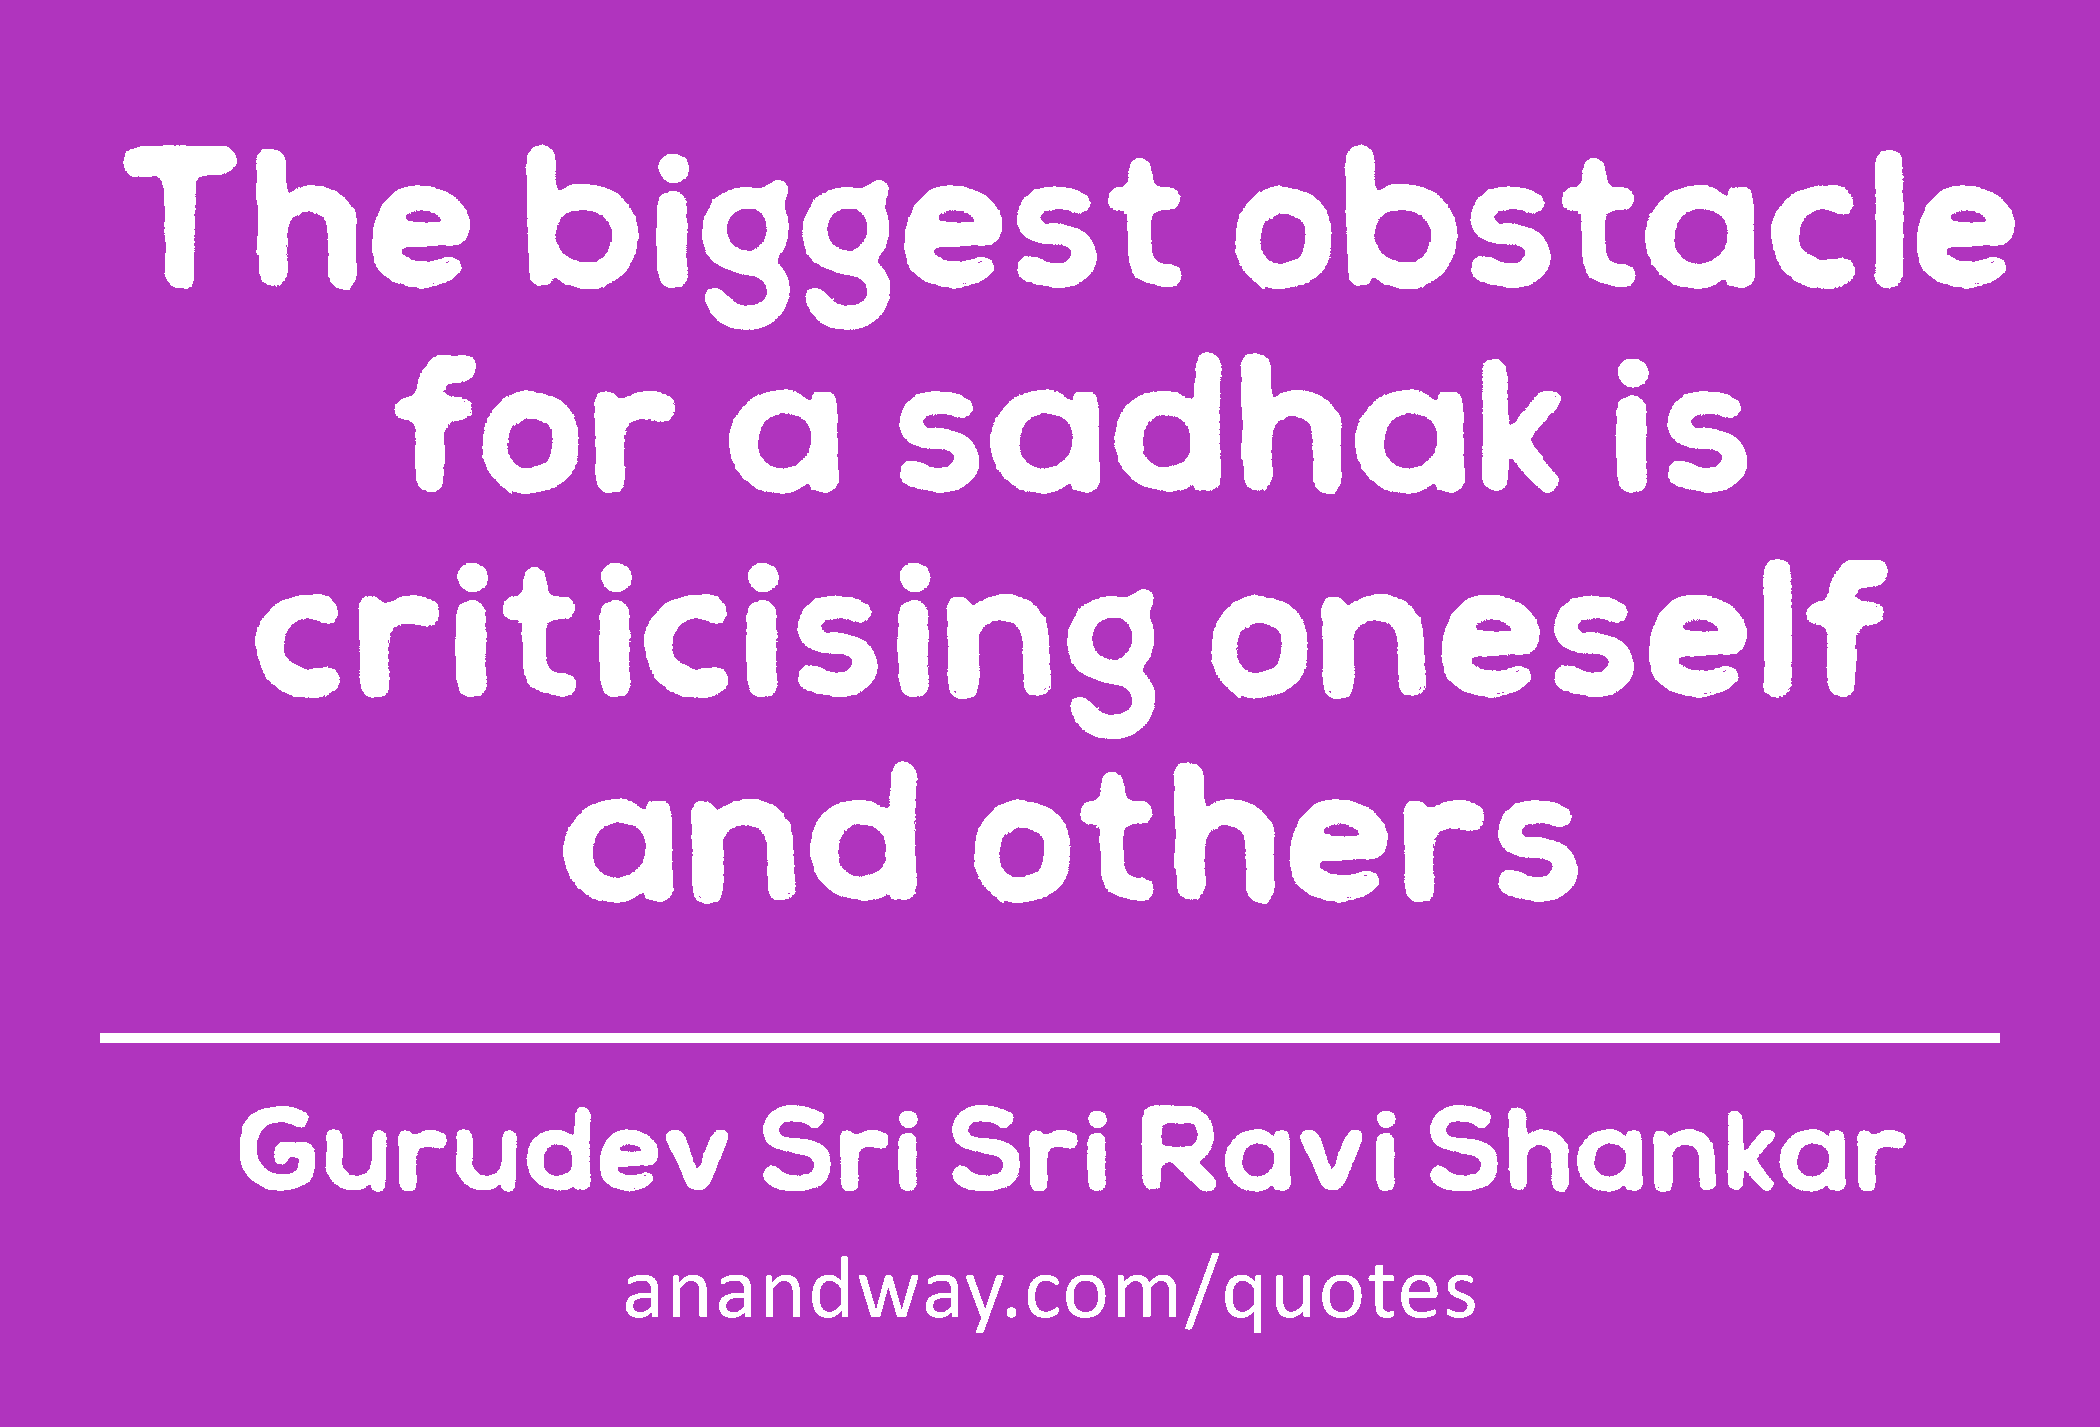 The biggest obstacle for a sadhak is criticising oneself and others 
 -Gurudev Sri Sri Ravi Shankar